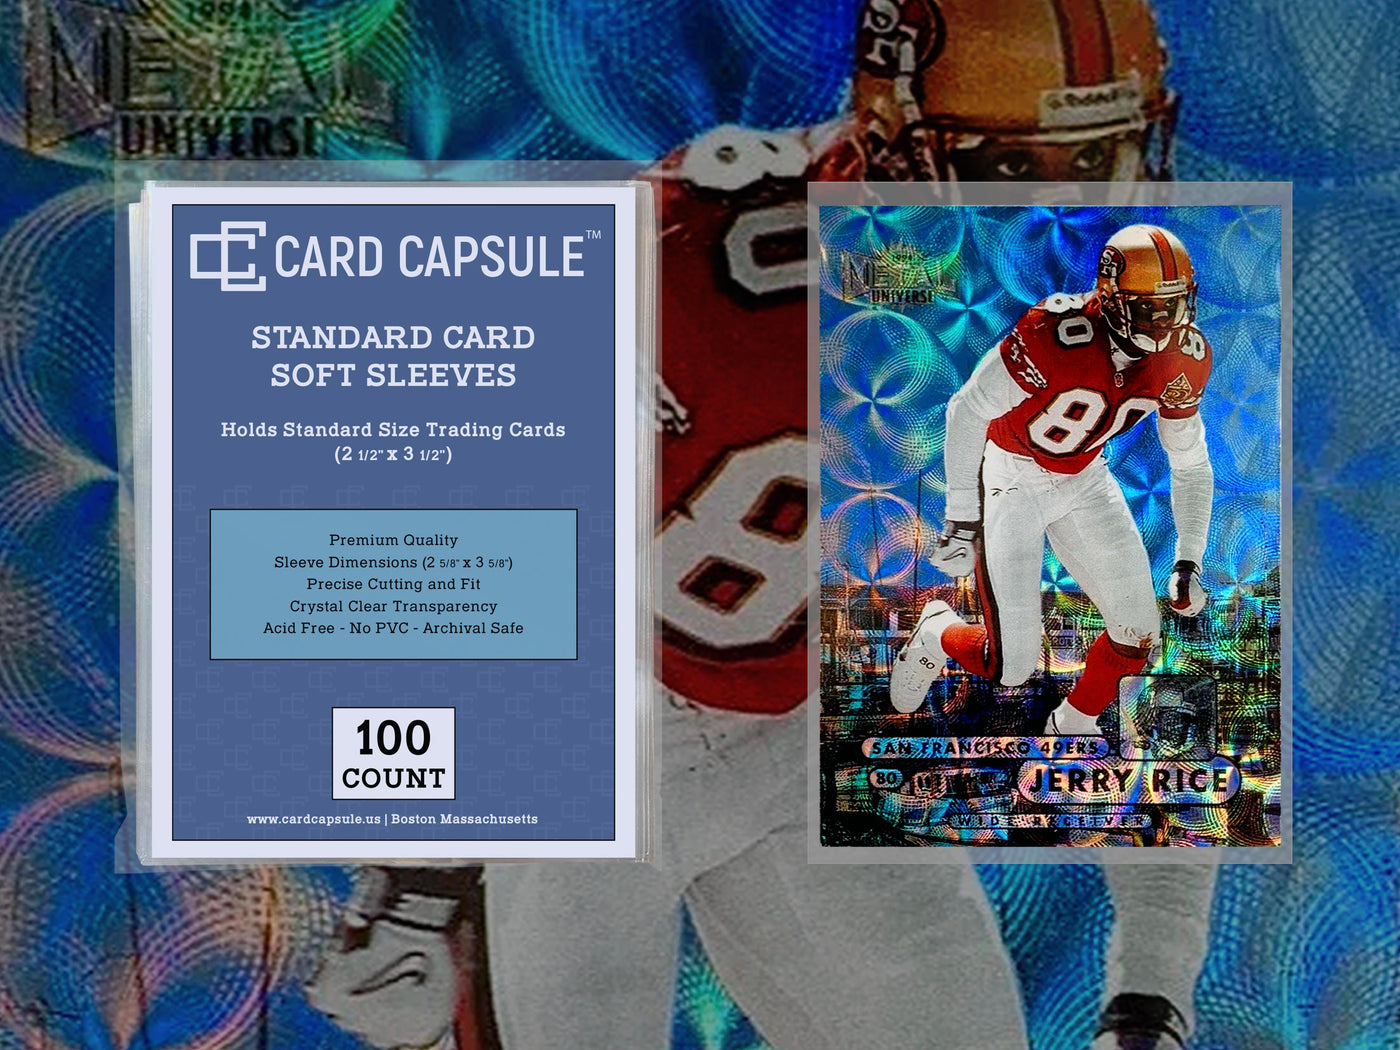 A pack of 100 Card Capsule standard size penny sleeves for sport cards, featuring a 1998 Metal Universe Precious Metal Gems PMG Jerry Rice football card inside a card sleeve